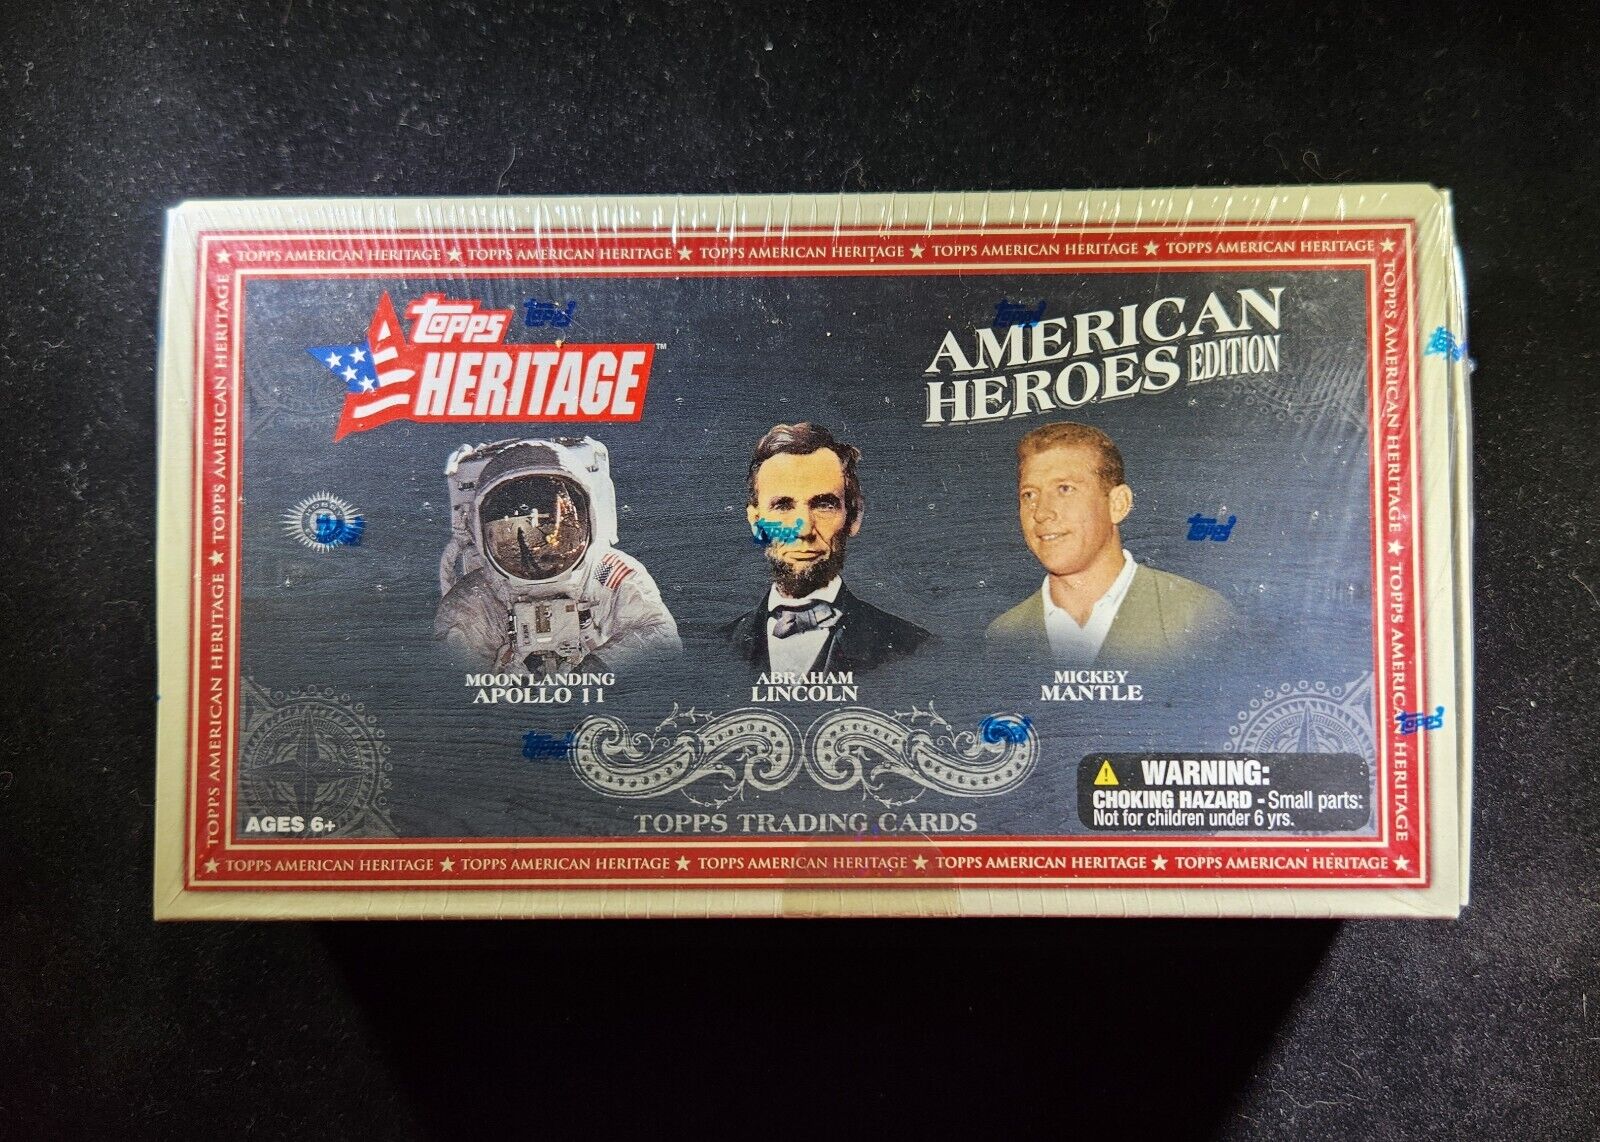 Topps Heritage - American Heroes Edition - Sealed Hobby Box - RARE